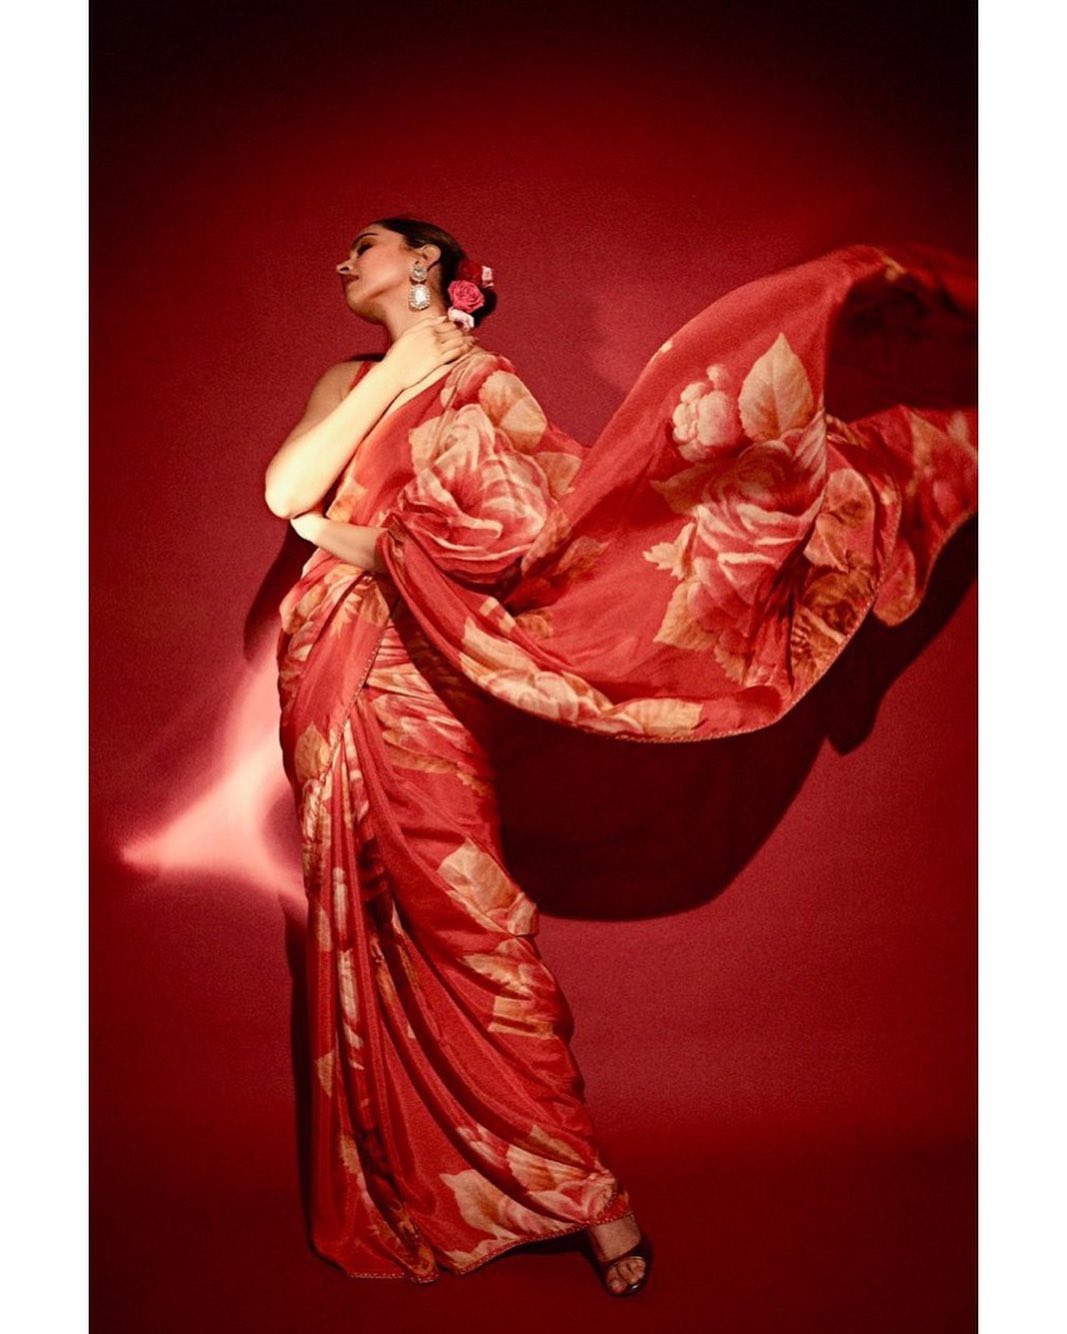 Deepika Padukone wears the floral saree with an unmatched panache.